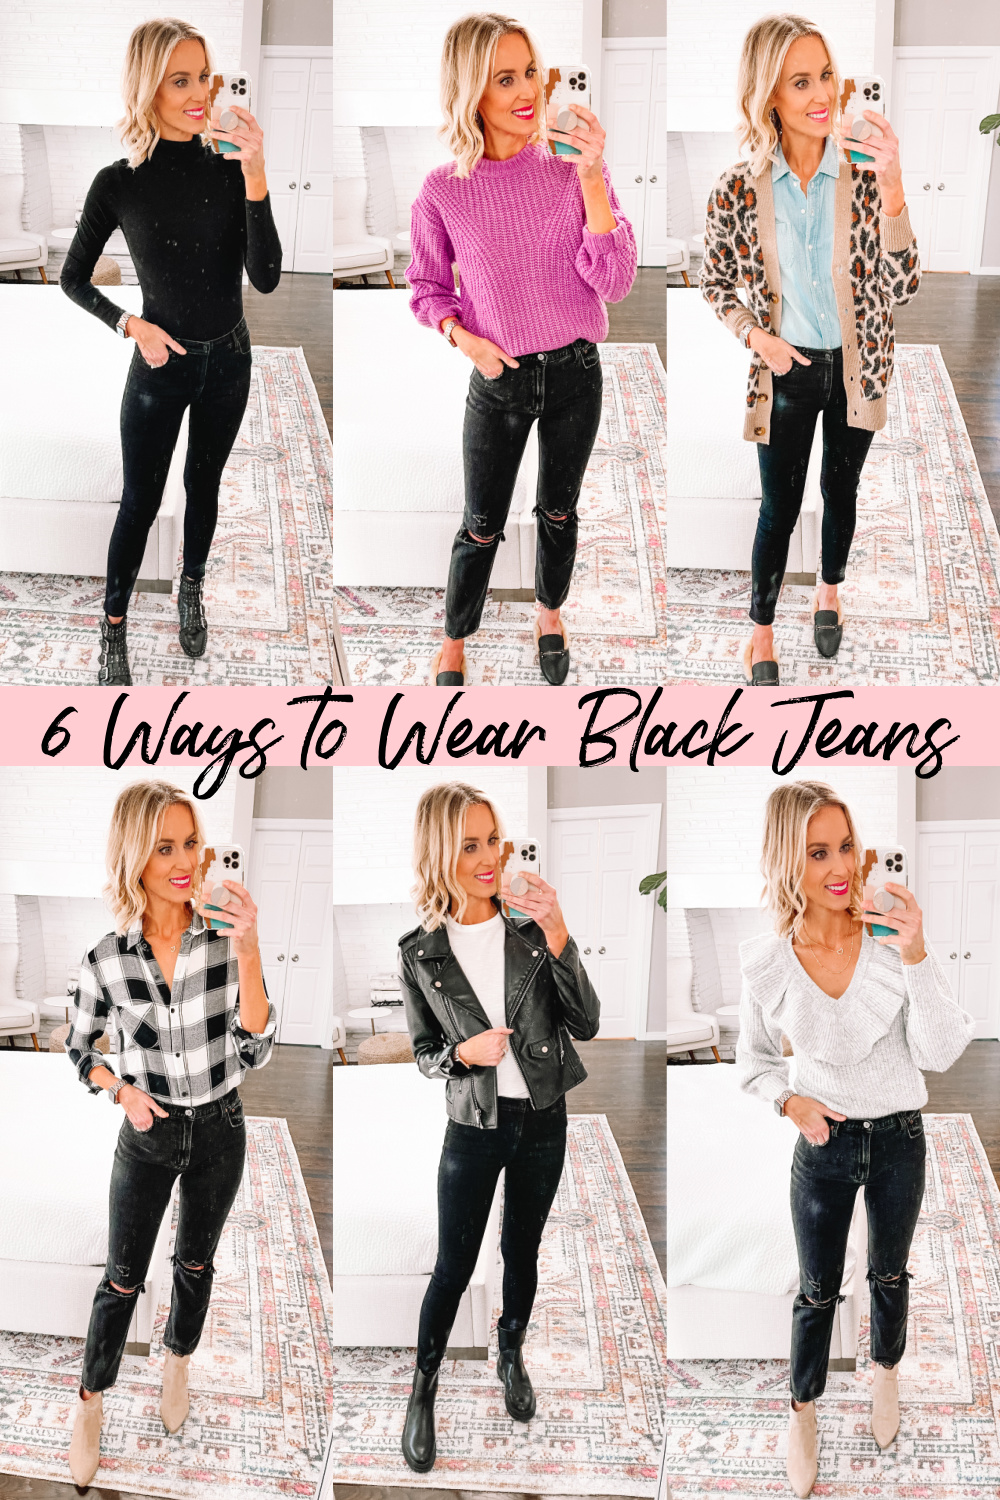 What to wear with black jeans women's